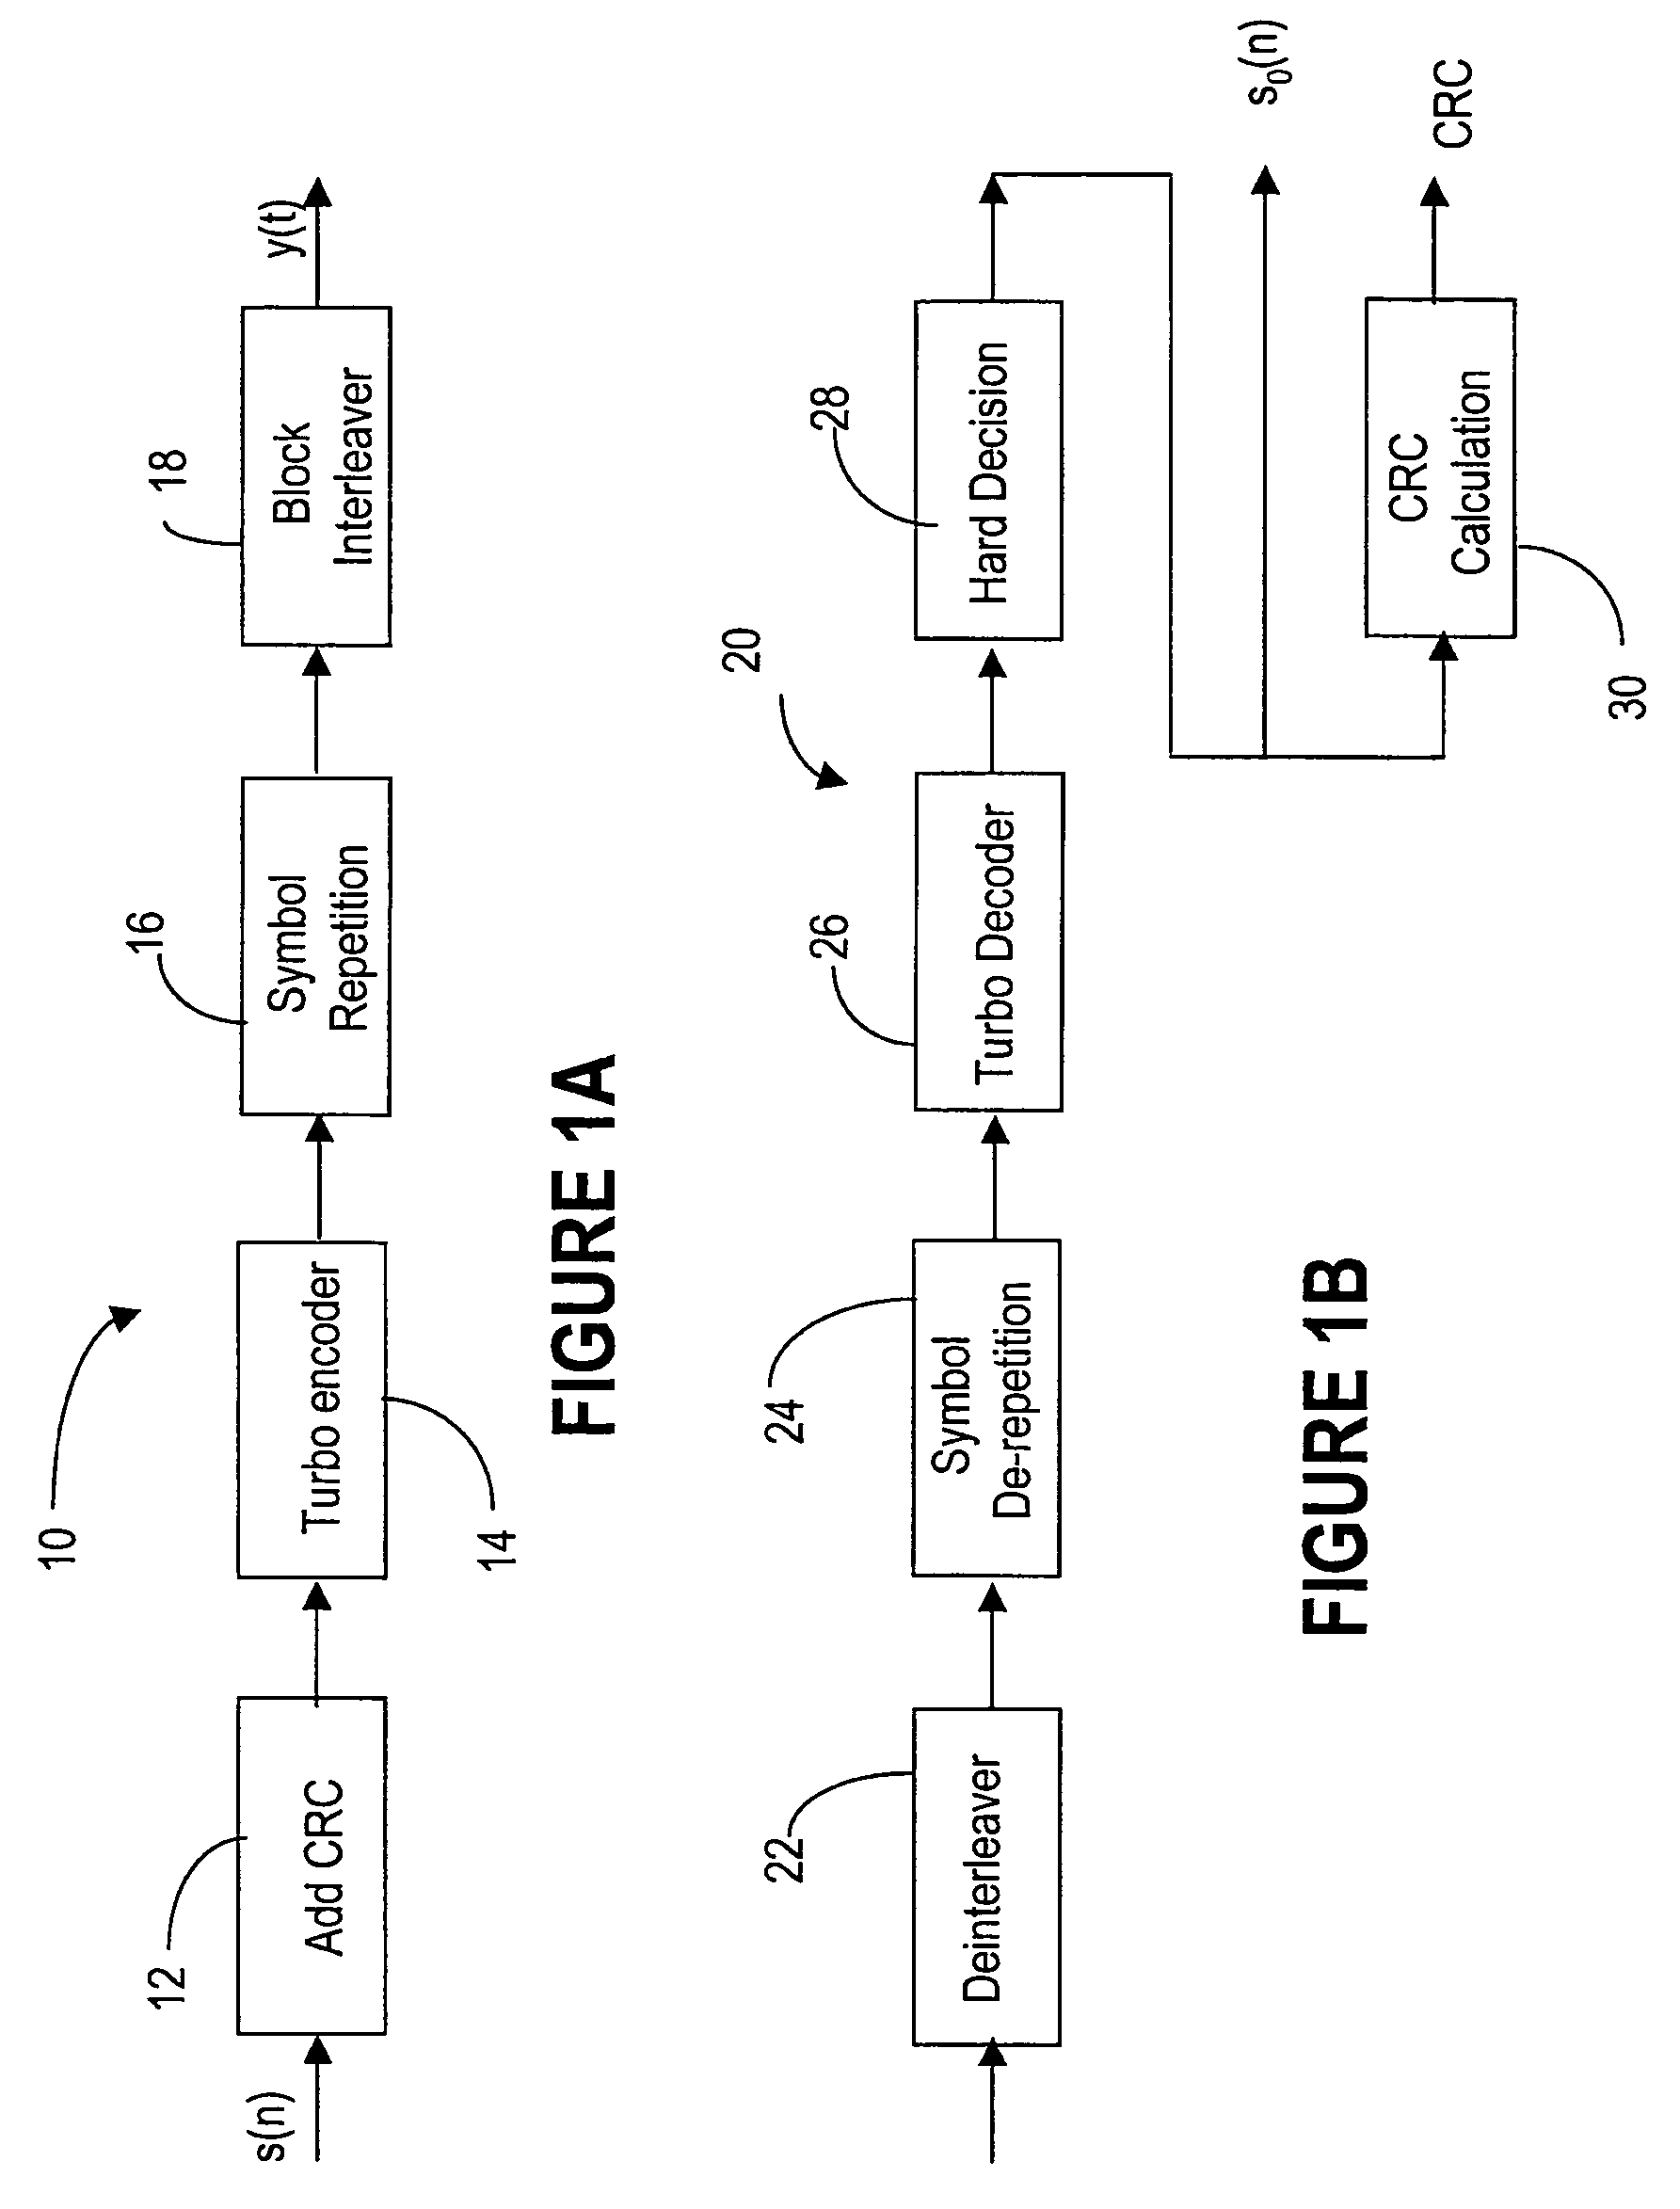 Method for determination of discontinuous transmission, frame erasure, and rate